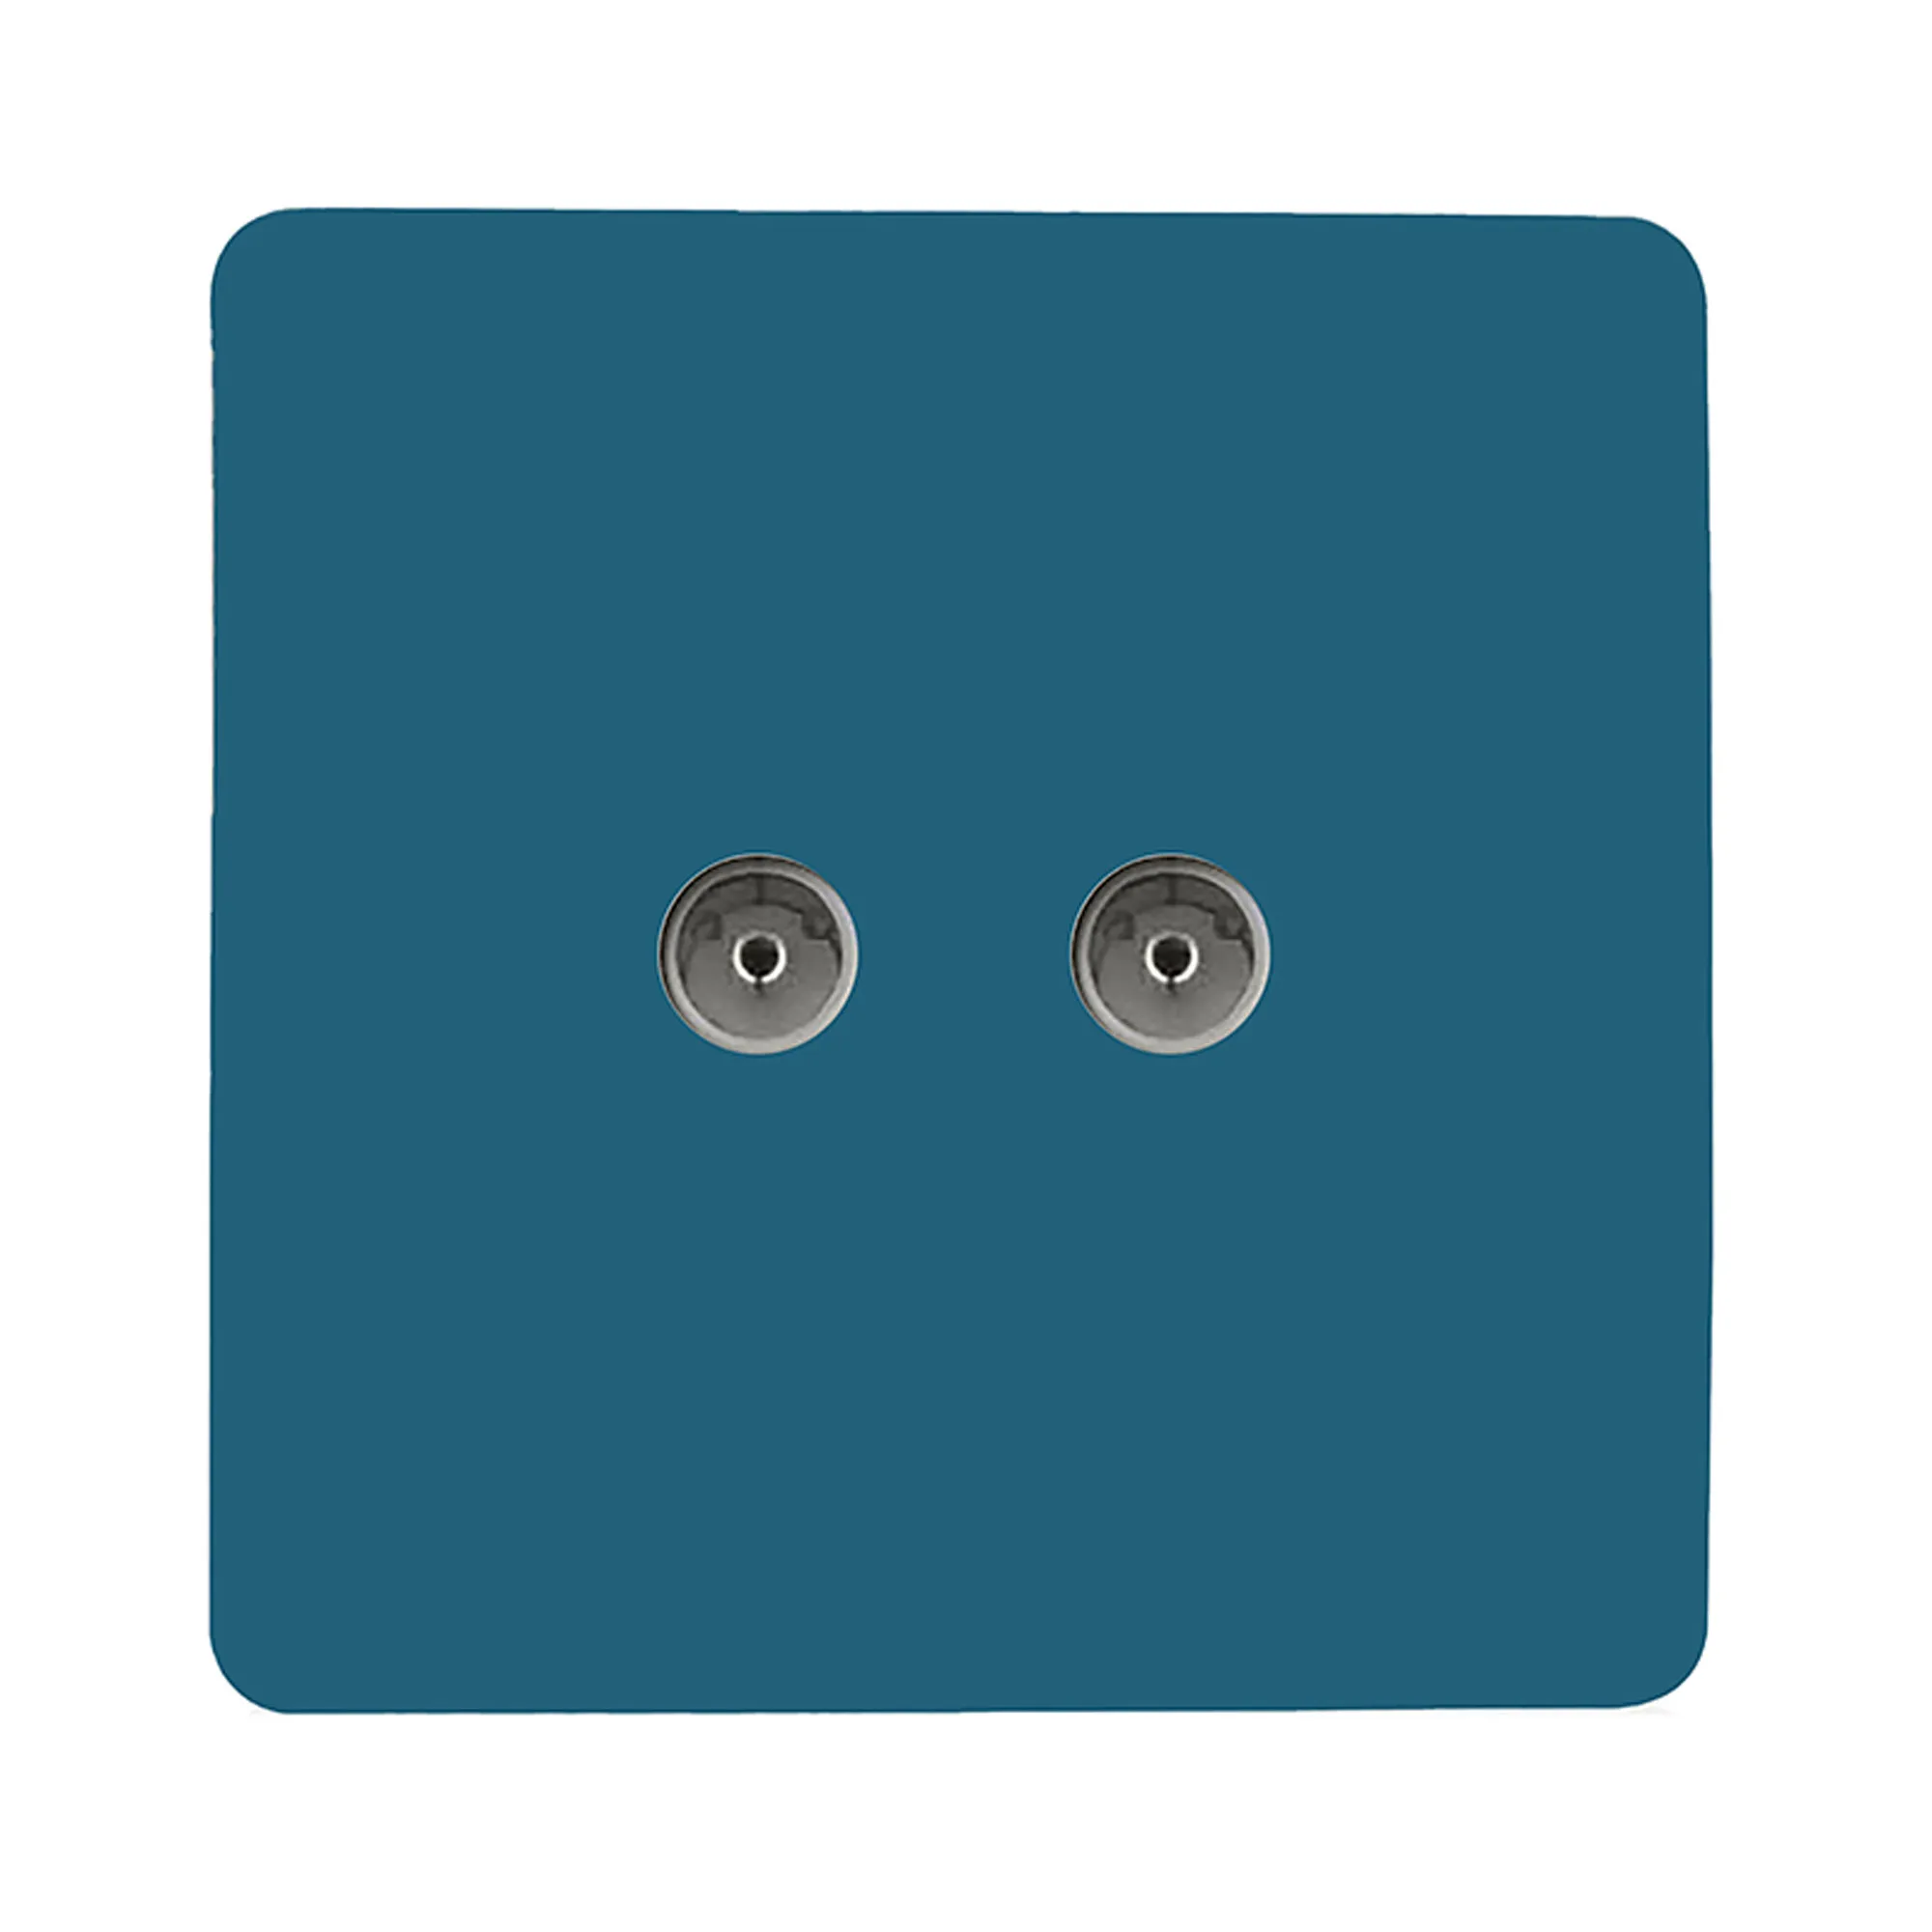 Twin TV Co-Axial Outlet Ocean Blue